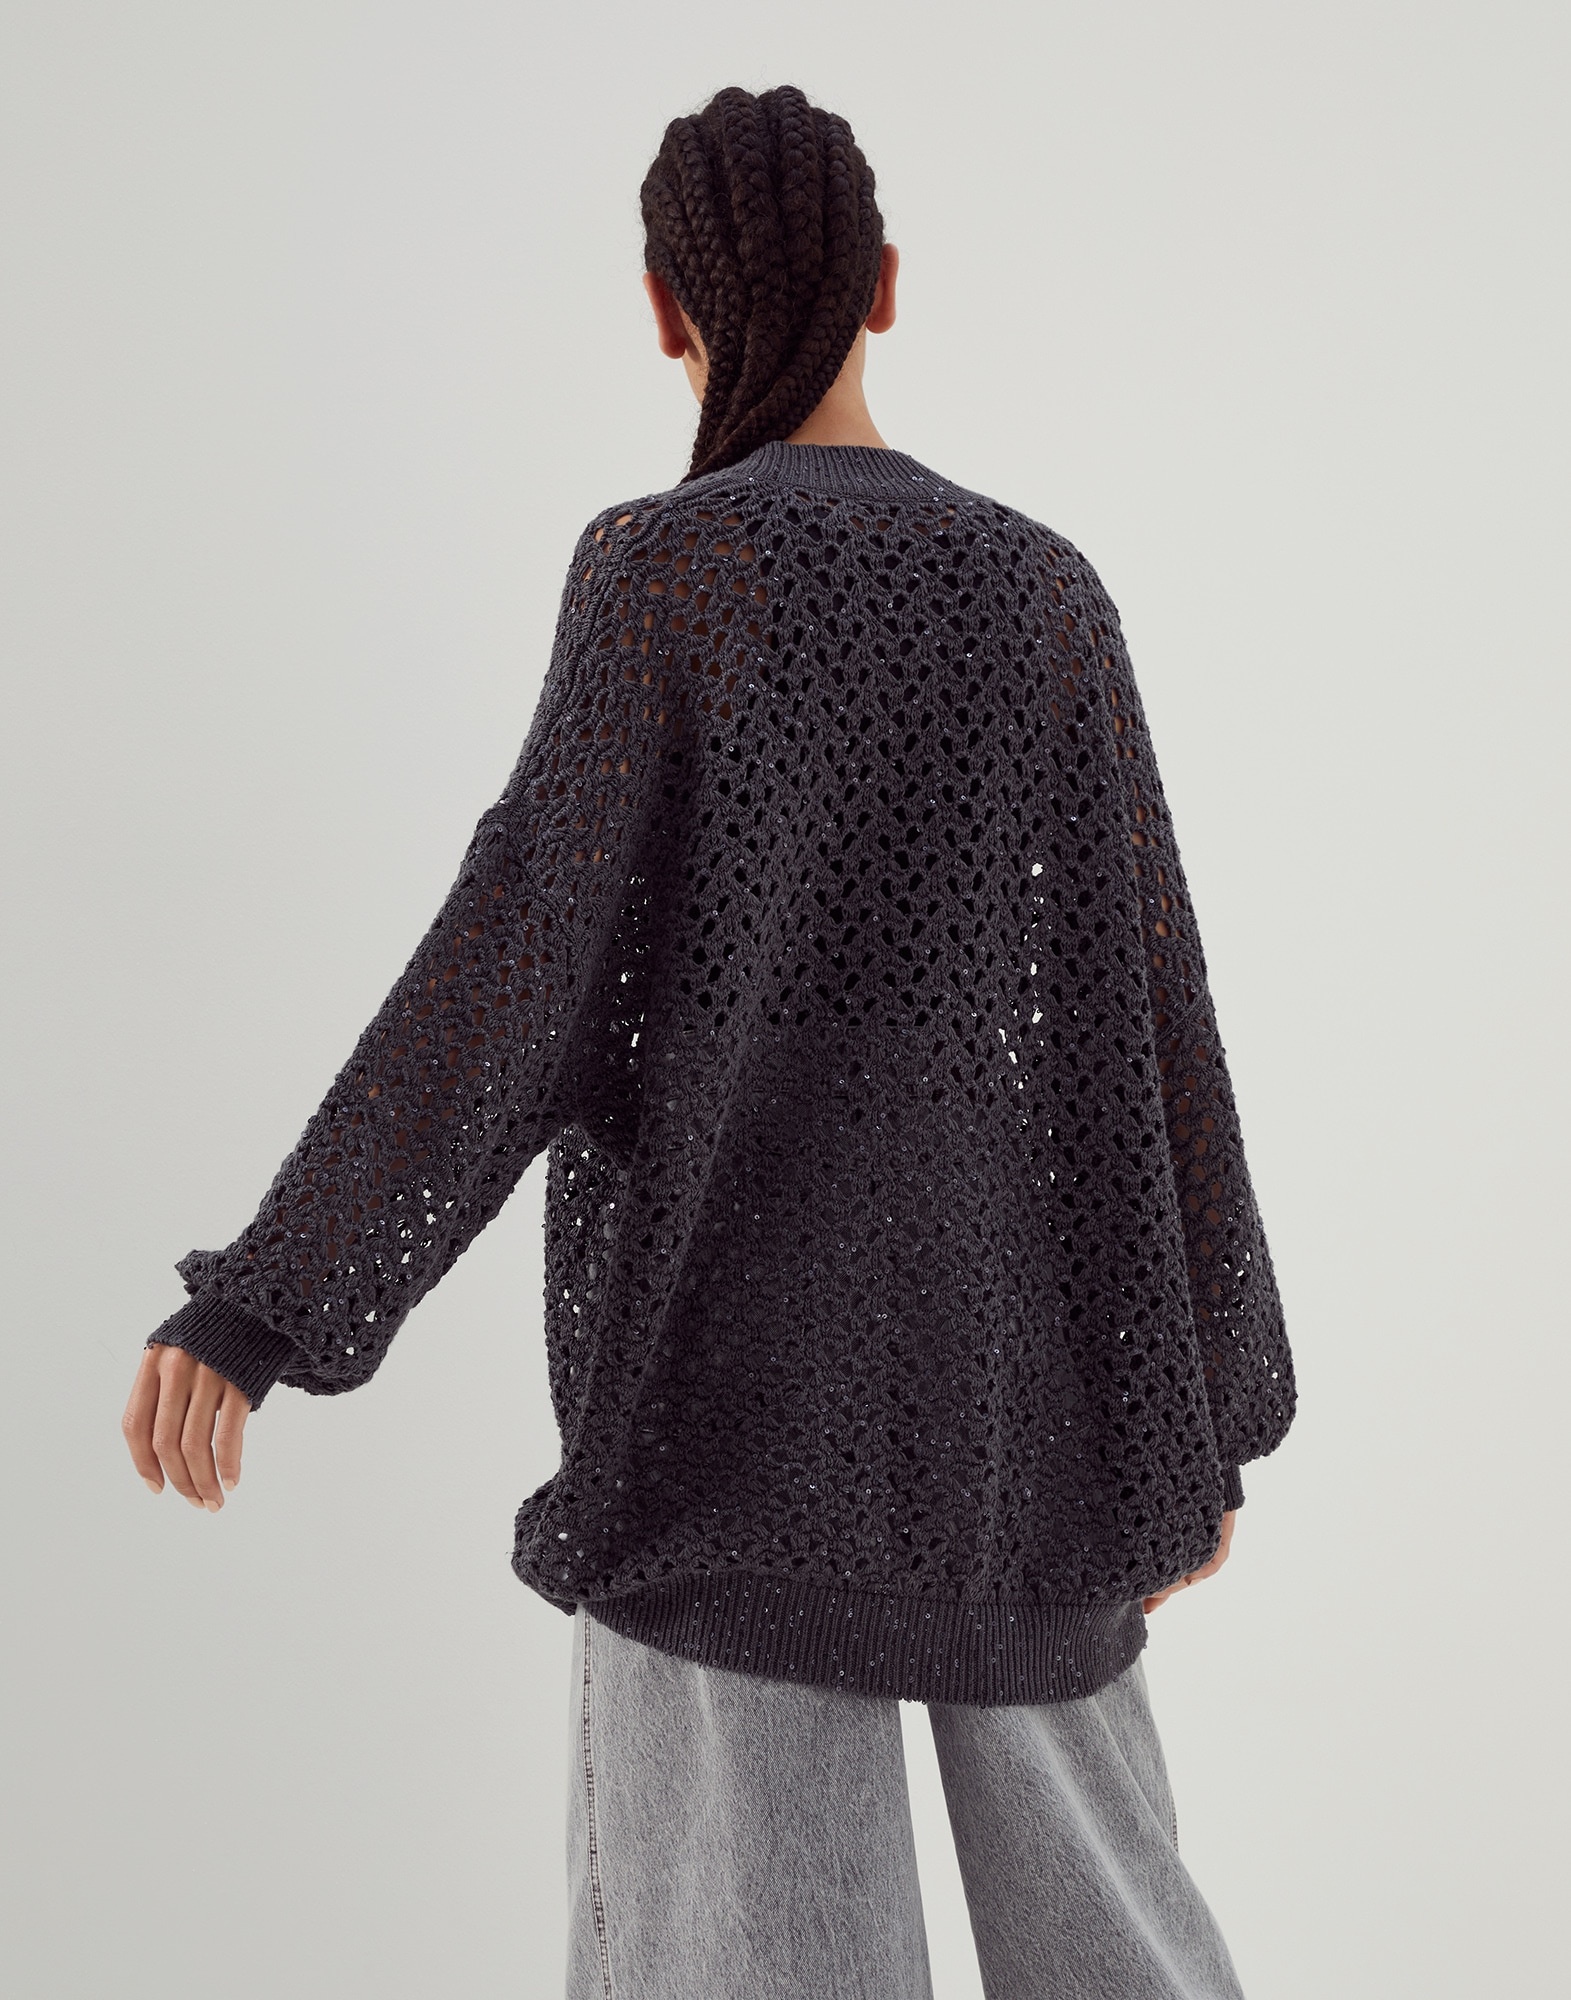 Dazzling Net cardigan in cotton, linen and silk - 2